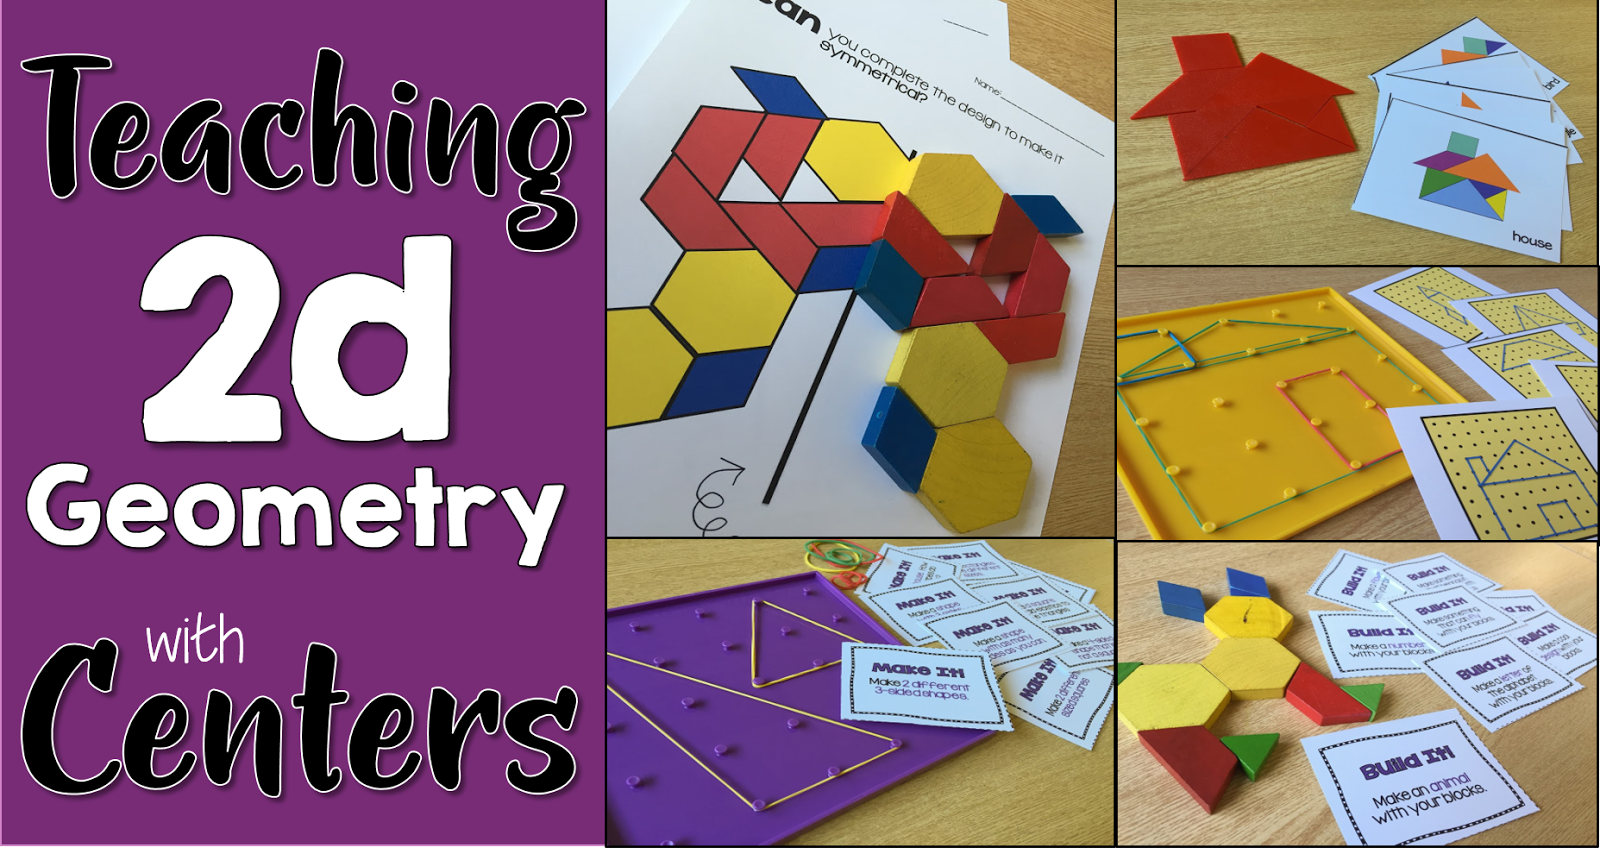 2D Shapes - Elementary Math Steps, Examples & Questions